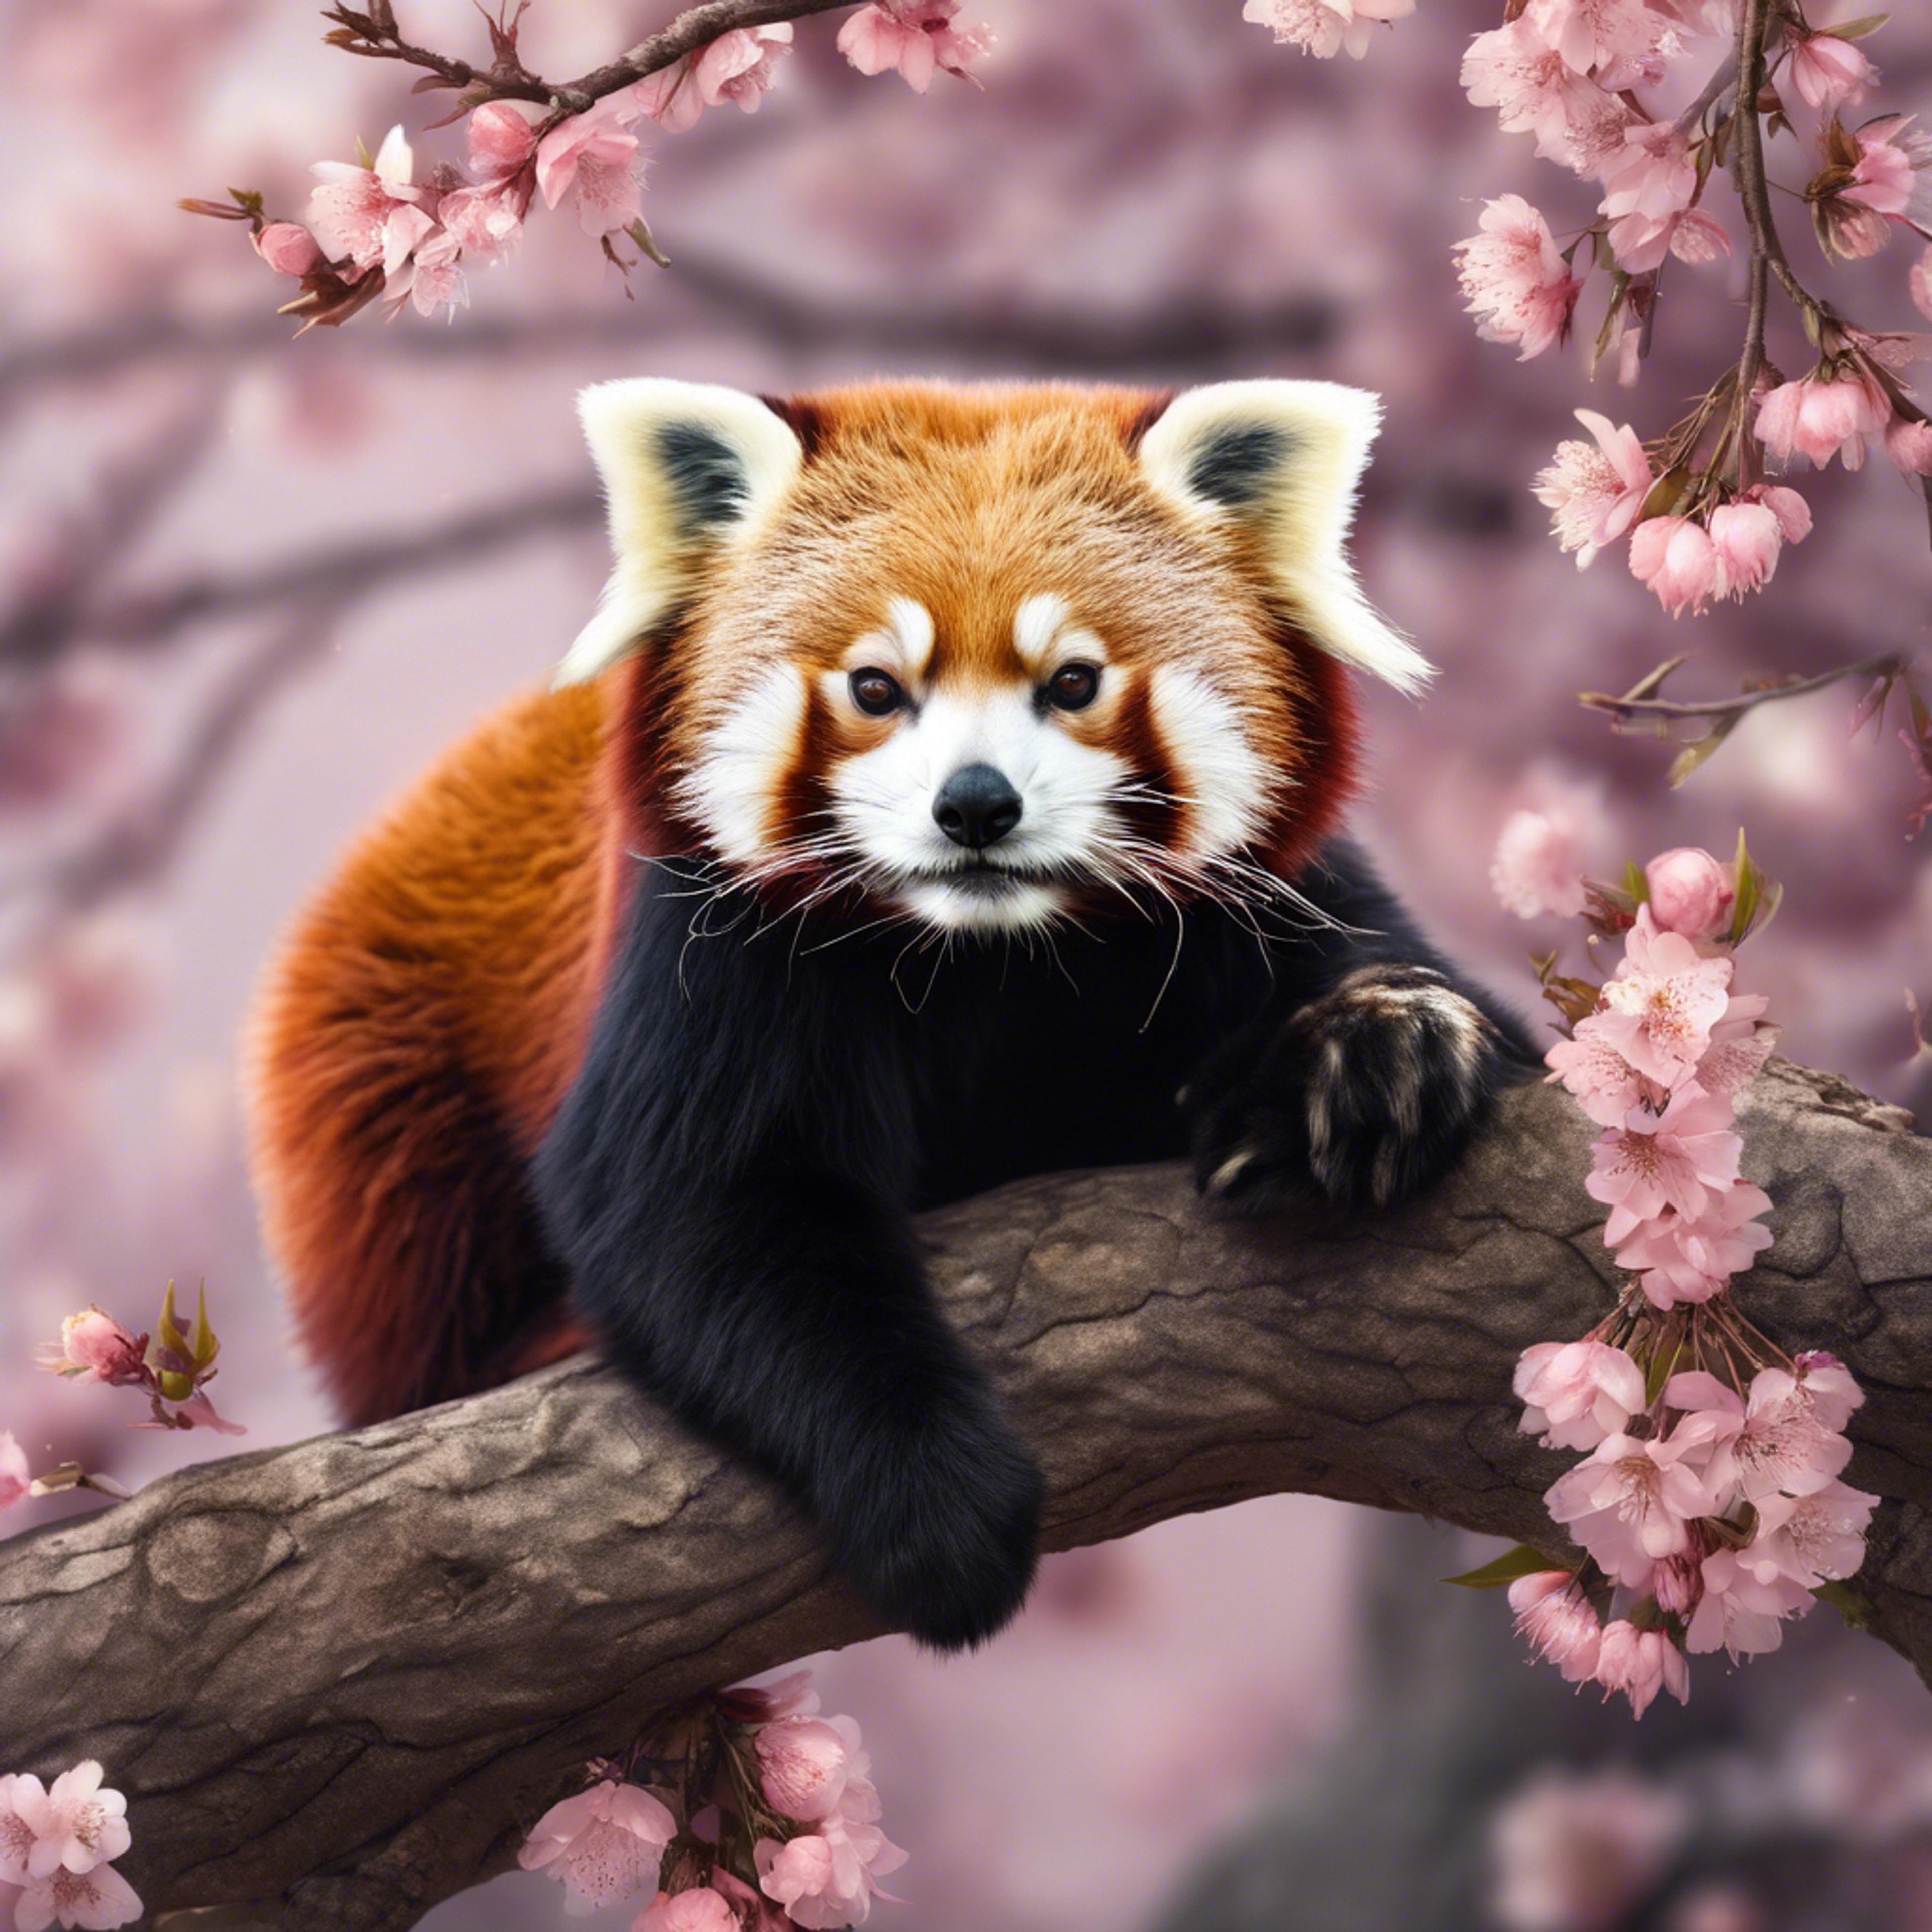 A red panda lounging lazily on a tree branch with a backdrop of blooming cherry blossoms. 墙纸[422b6dc9464b43ba80b6]